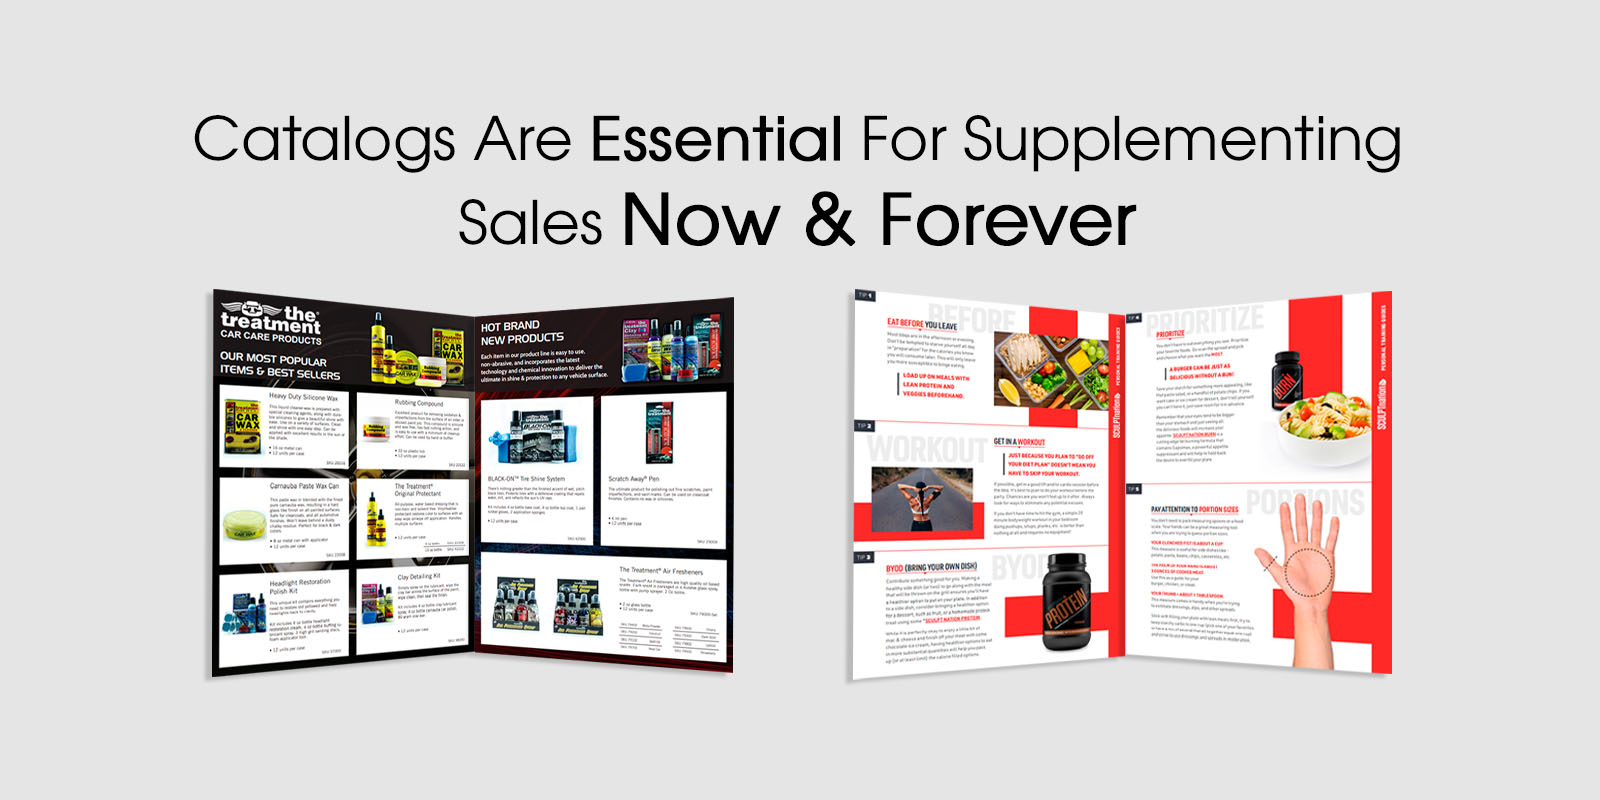 Catalog Marketing Is Essential For Supplementing Sales Now & Forever